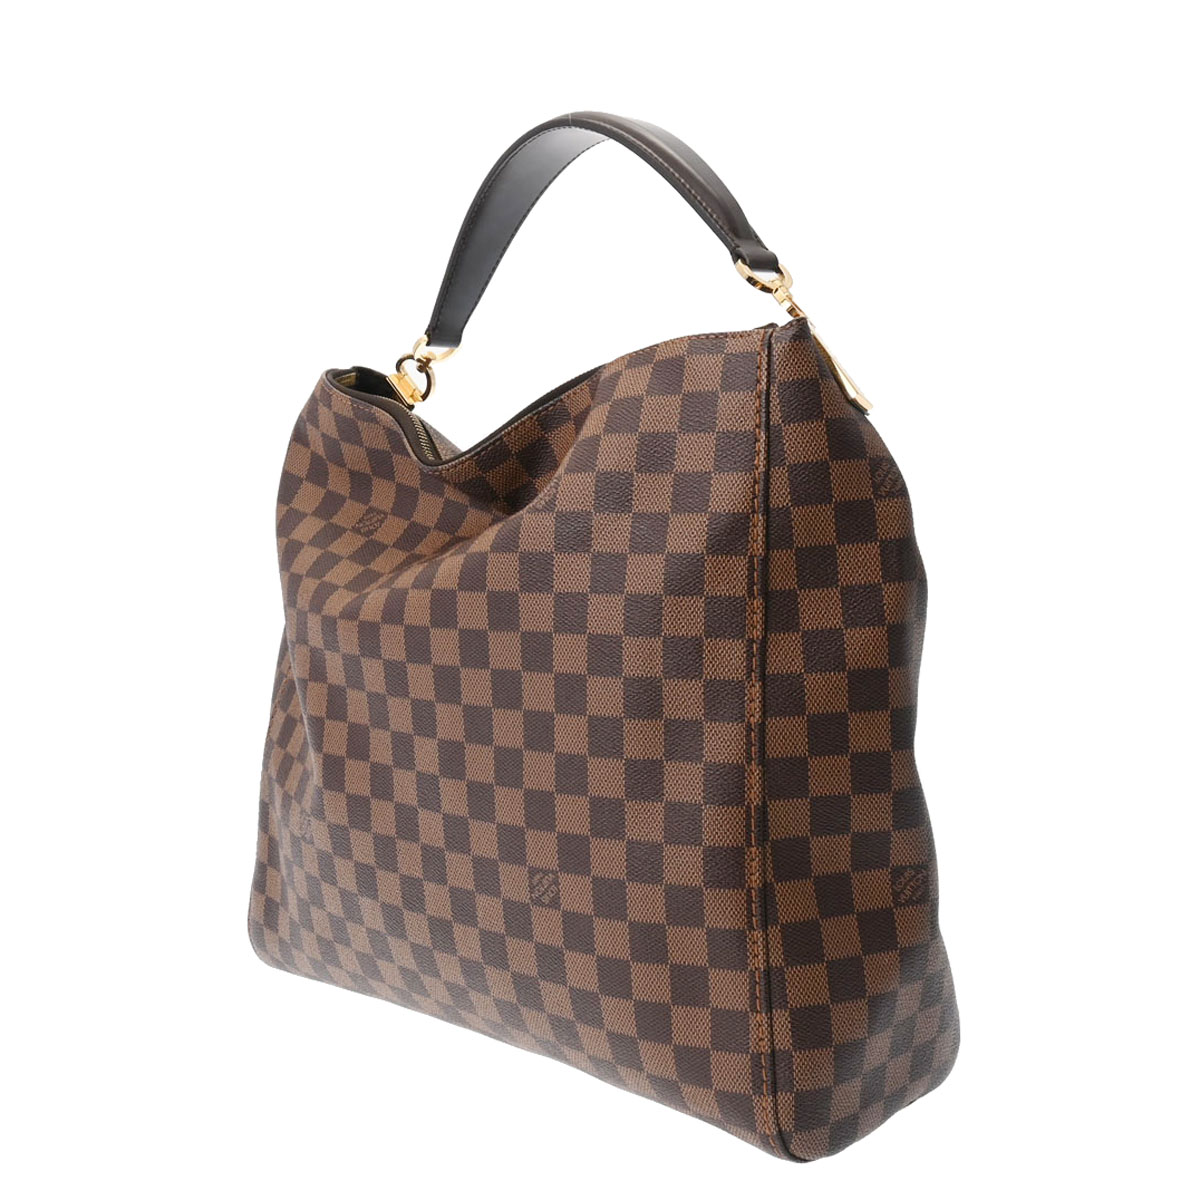 LOUIS VUITTON ルイ・ヴィトン ダミエ ポートベロー 鞄 バッグ △WP1594-